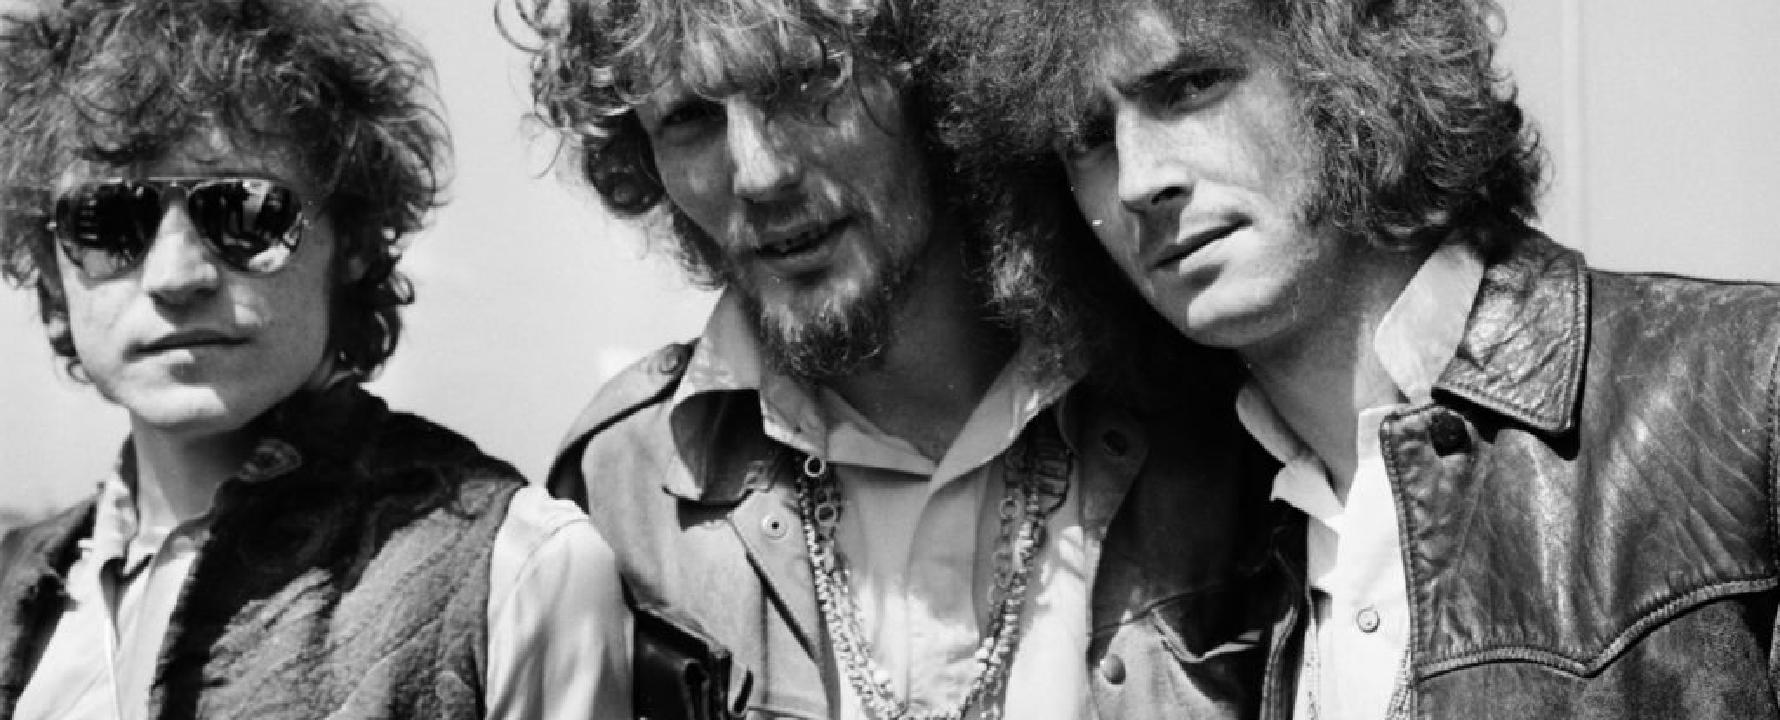 Promotional photograph of Cream.